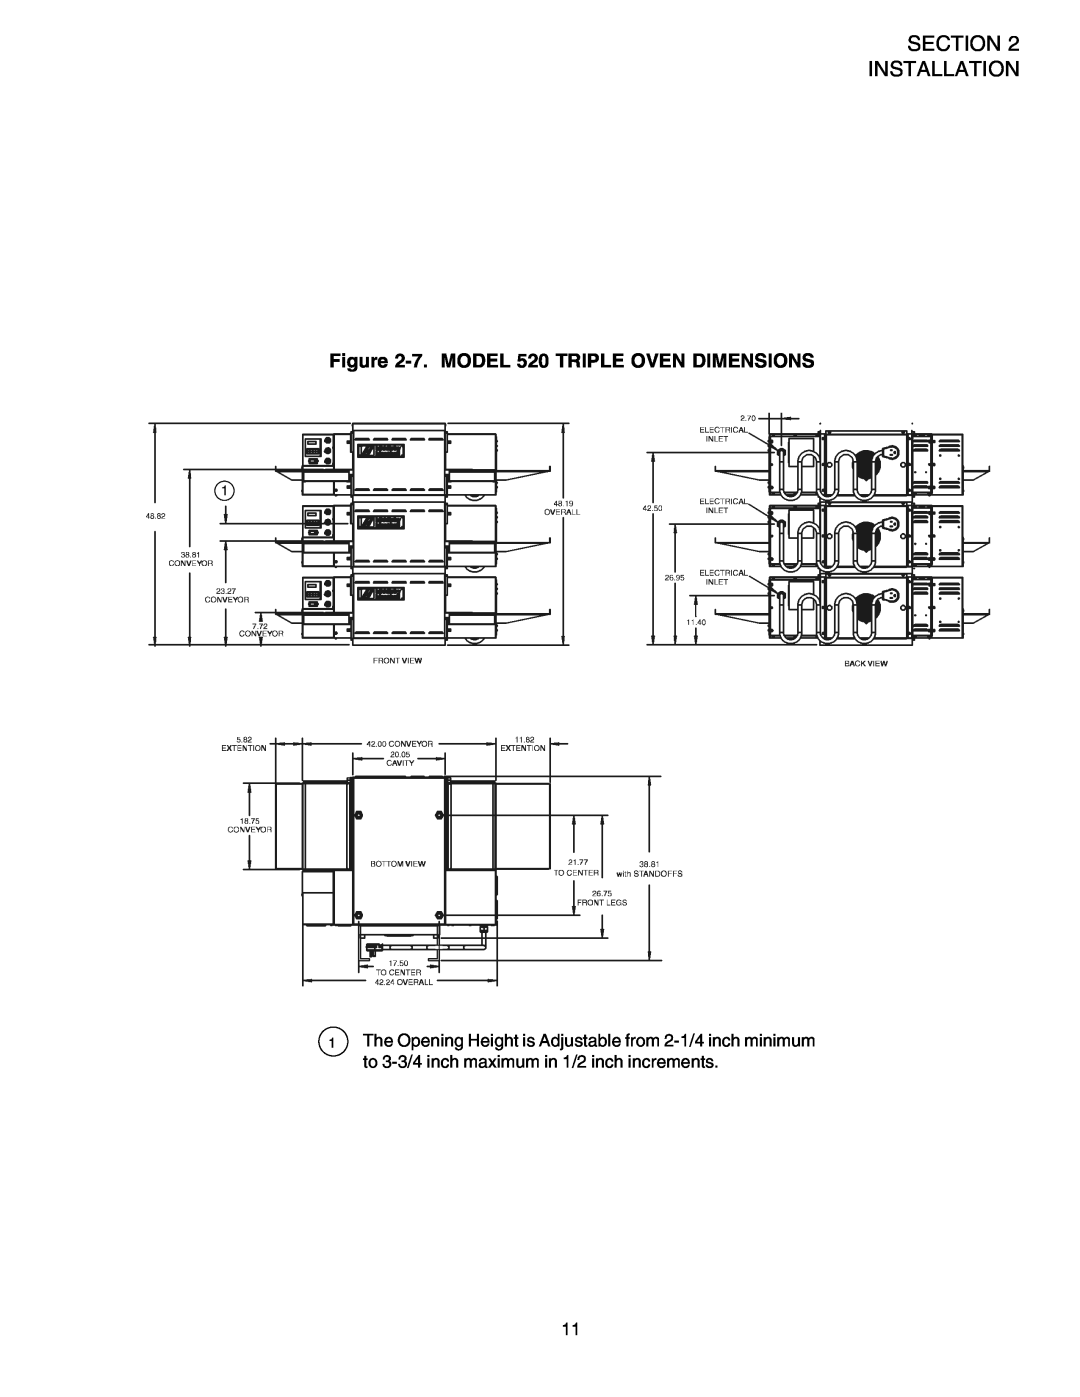 Middleby Marshall PS520 installation manual Section Installation, 7.MODEL 520 TRIPLE OVEN DIMENSIONS 